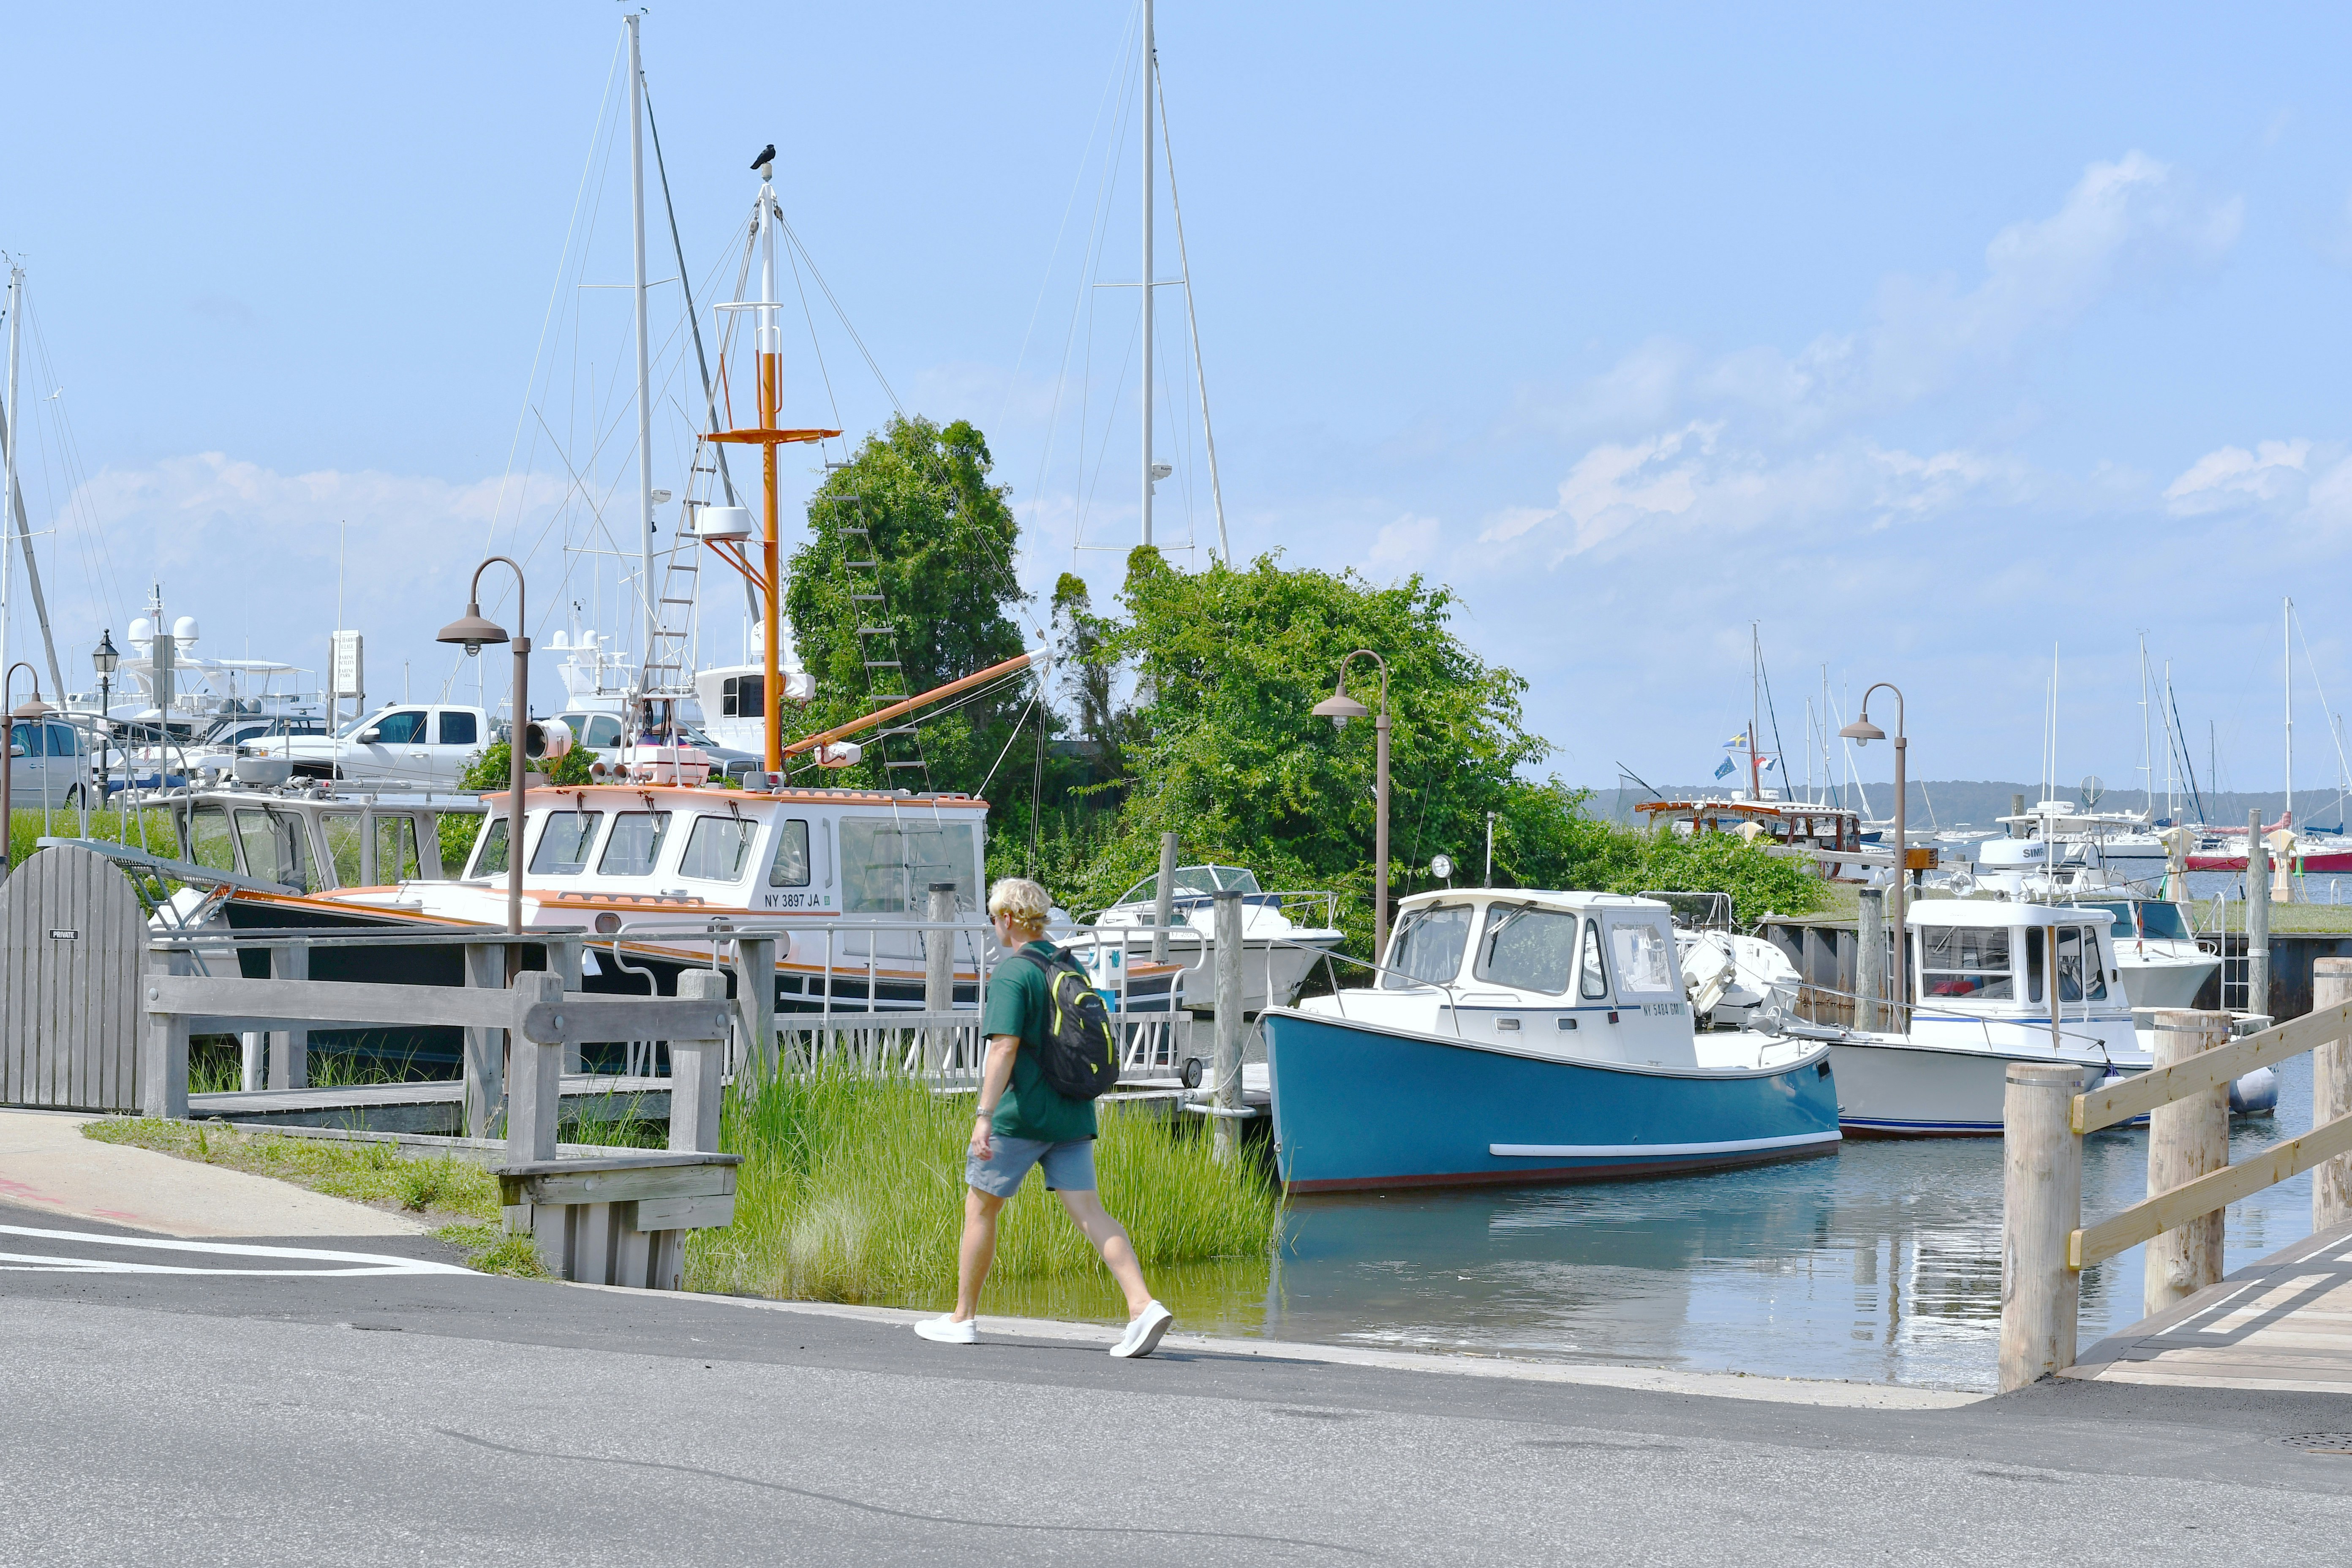 man in green shirt walking on the street near white and blue boat during daytime